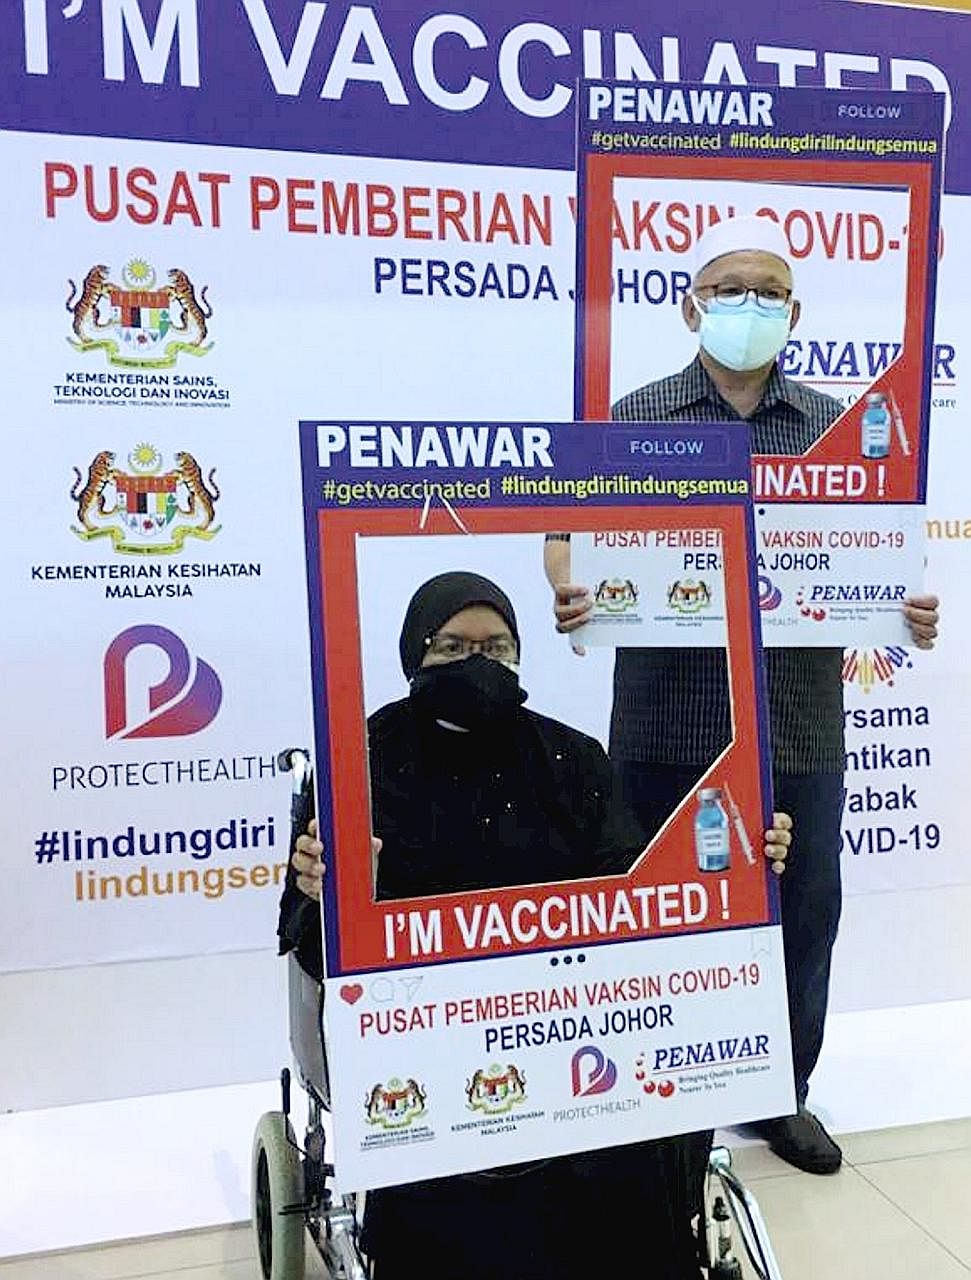 Retired school principal Idris Ahmad, 67, and his wife Azmah Hairun, 64, drove 127km from their home in Batu Pahat district in Johor to Johor Baru to get vaccinated against Covid-19 on Monday. The couple, seen here posing for a photo after getting th